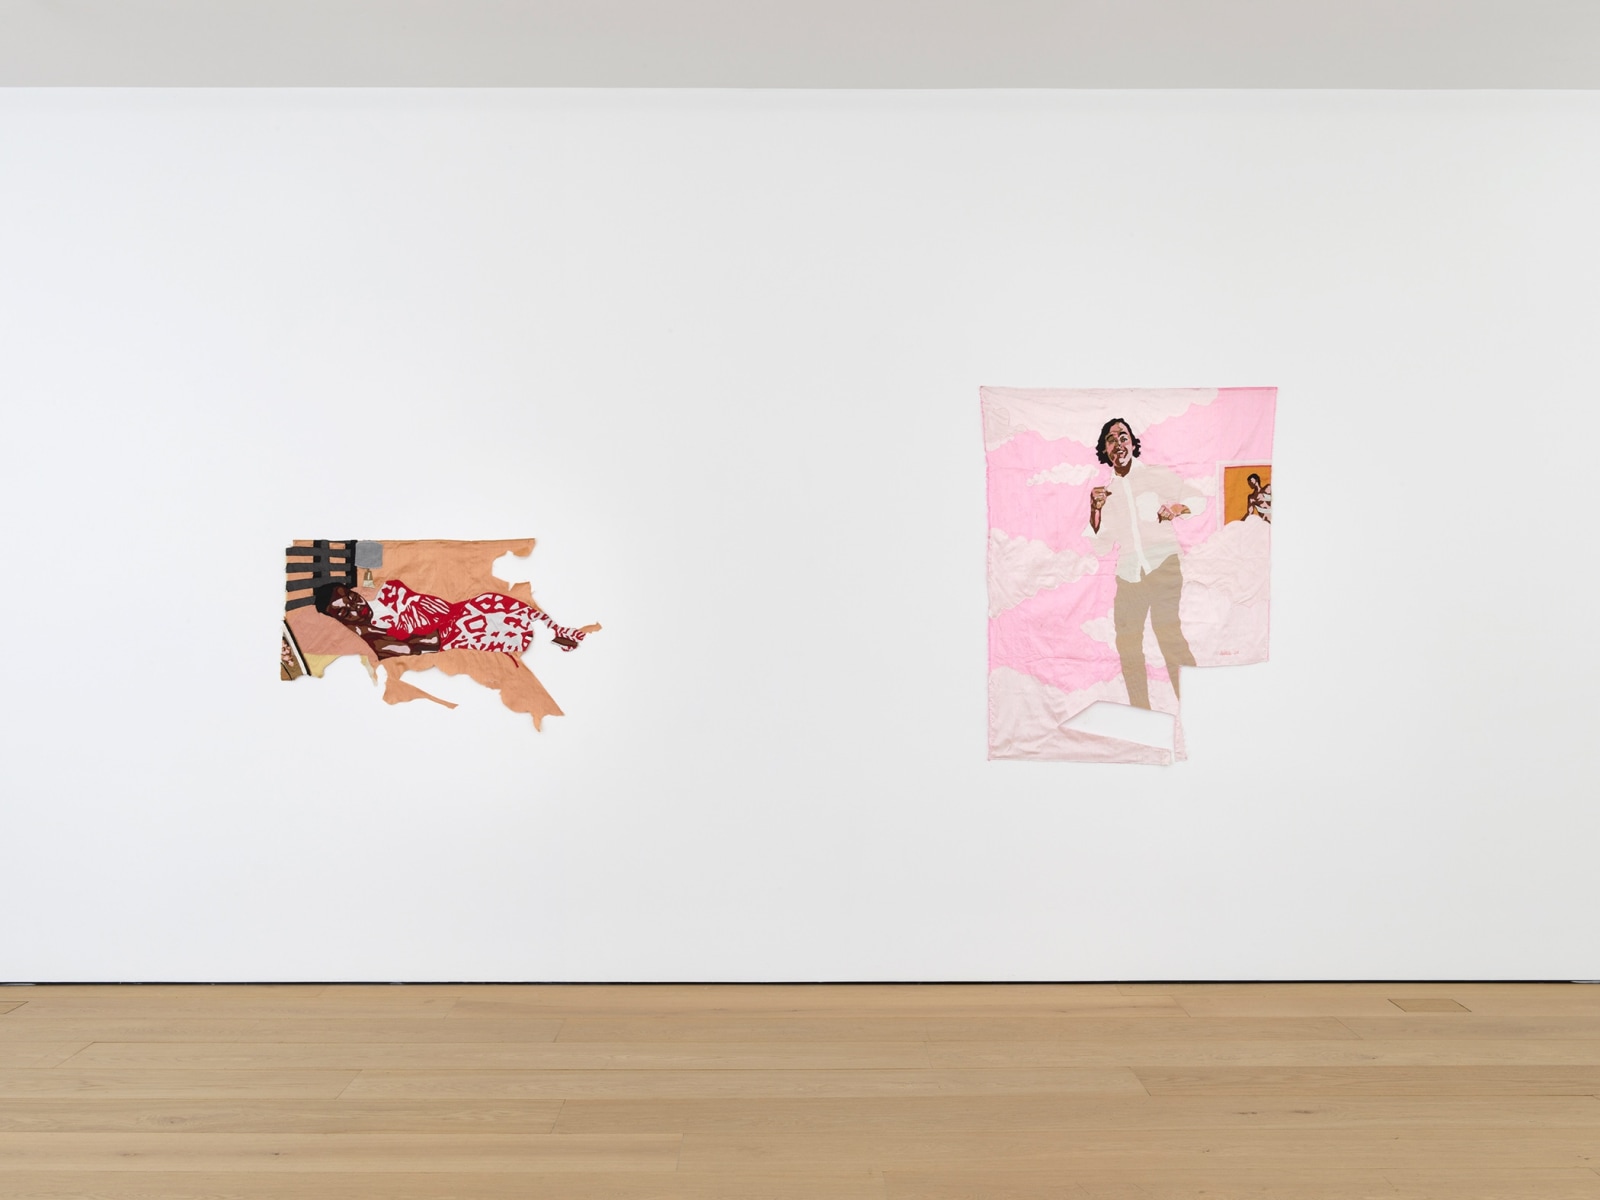 Sixth installation view of the exhibition Billie Zangewa: Wings of Change at Lehmann Maupin in New York